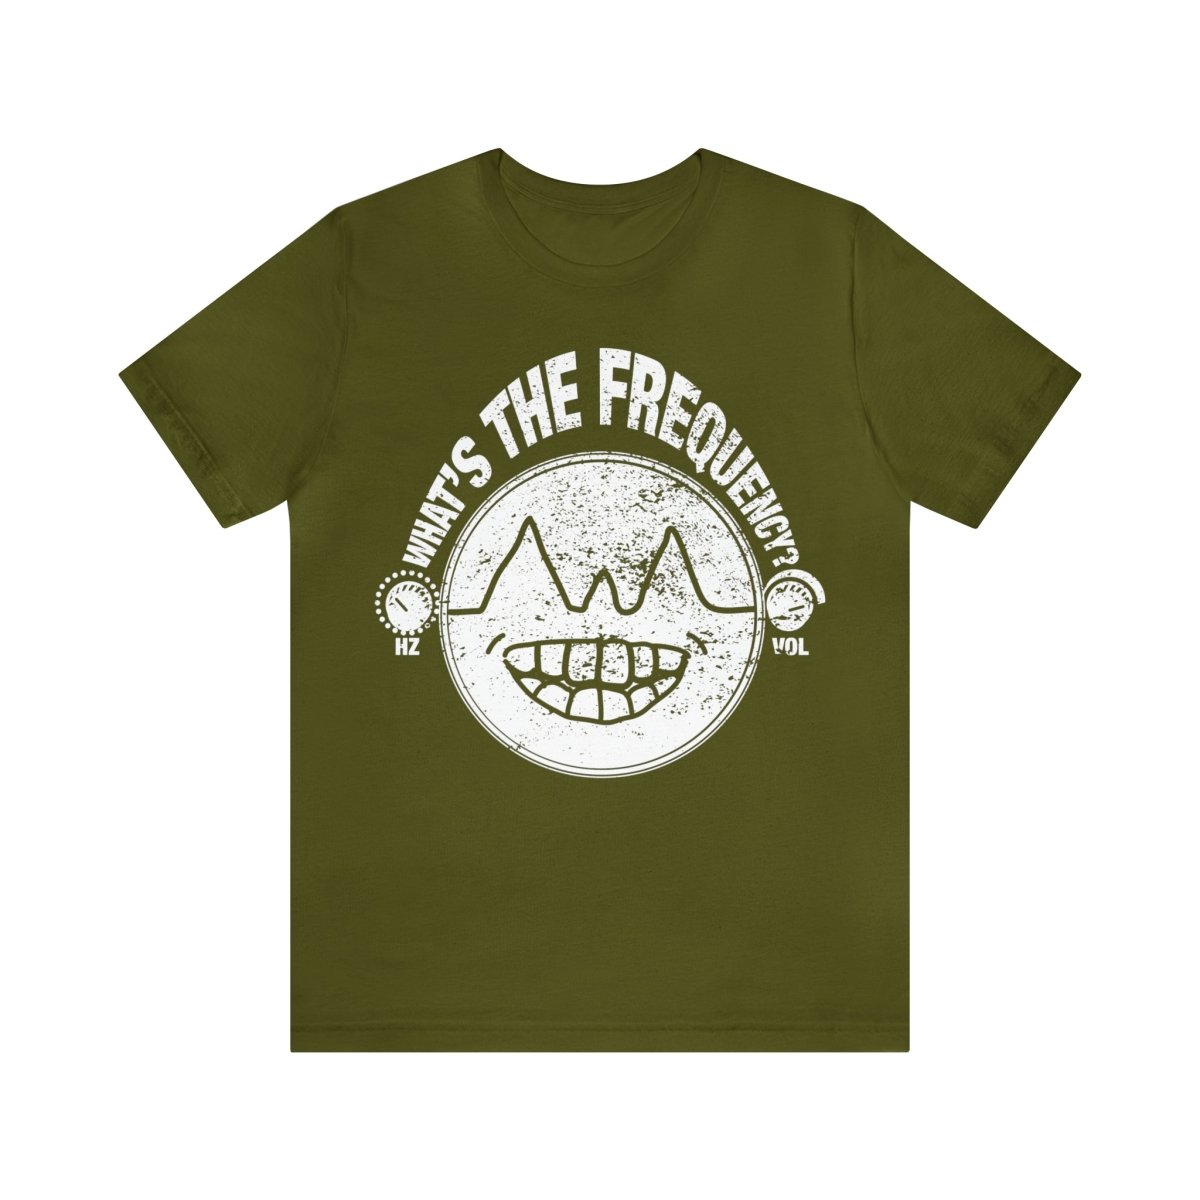 What's The Frequency? Premium T-Shirt, Tune In To The Right Frequency